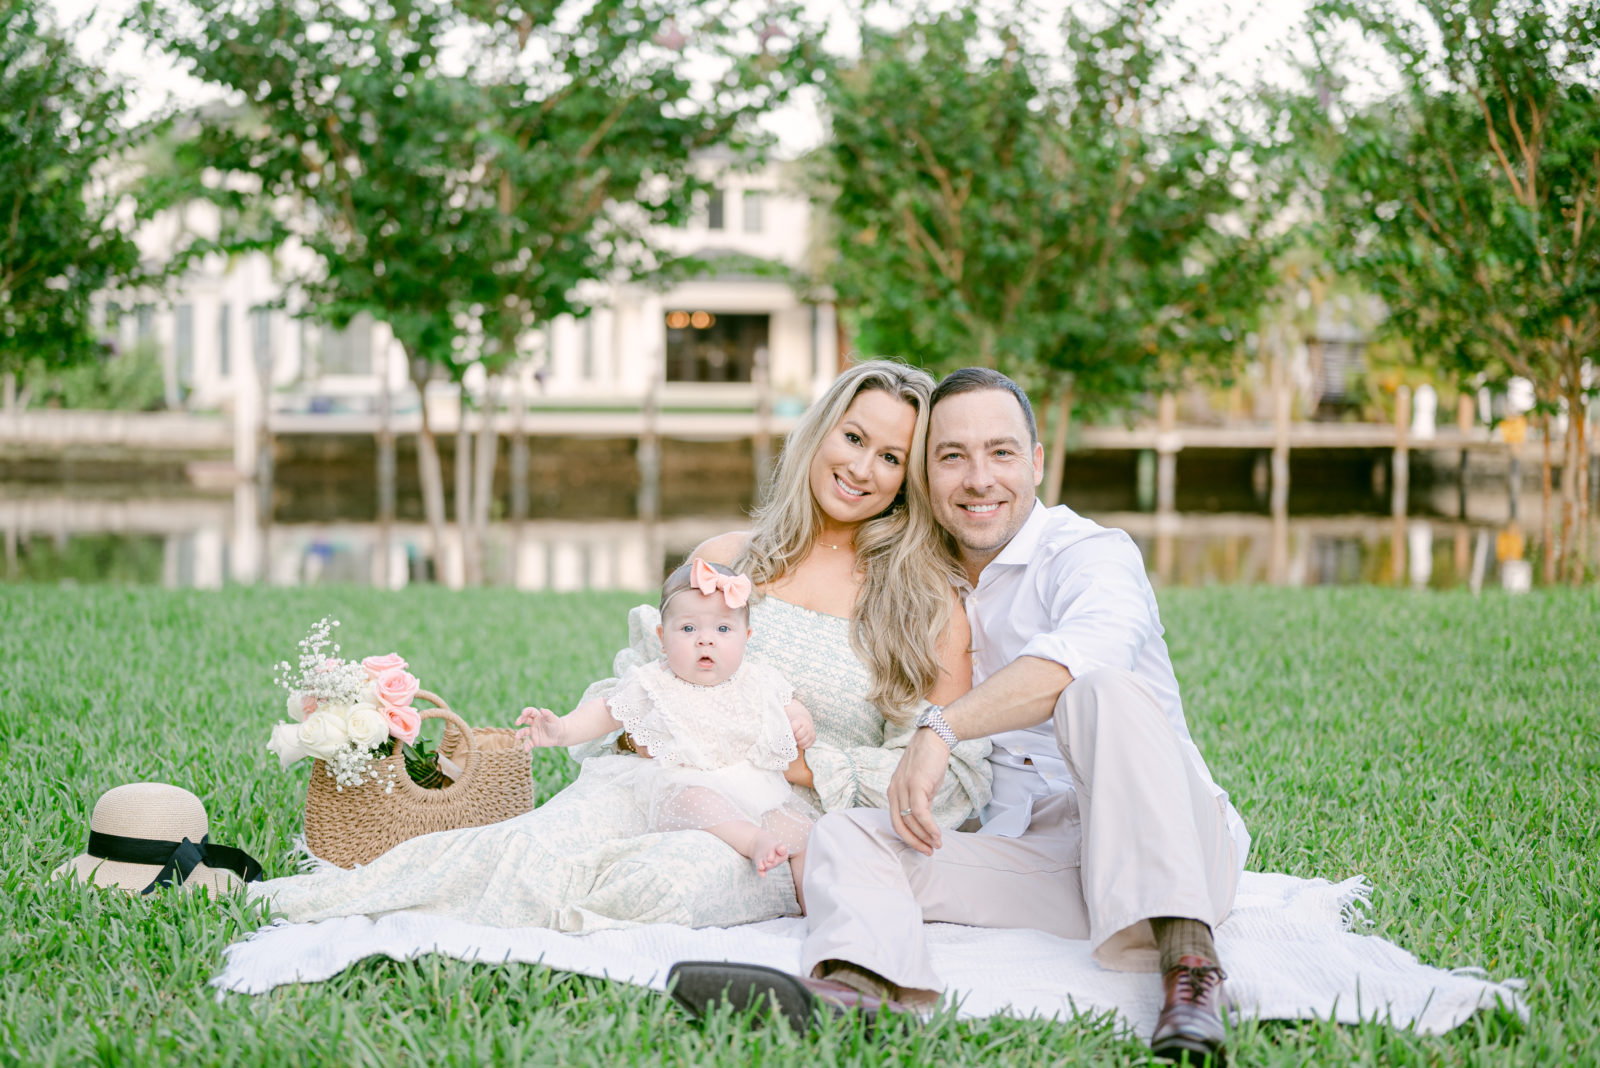 Family session in a park in Florida